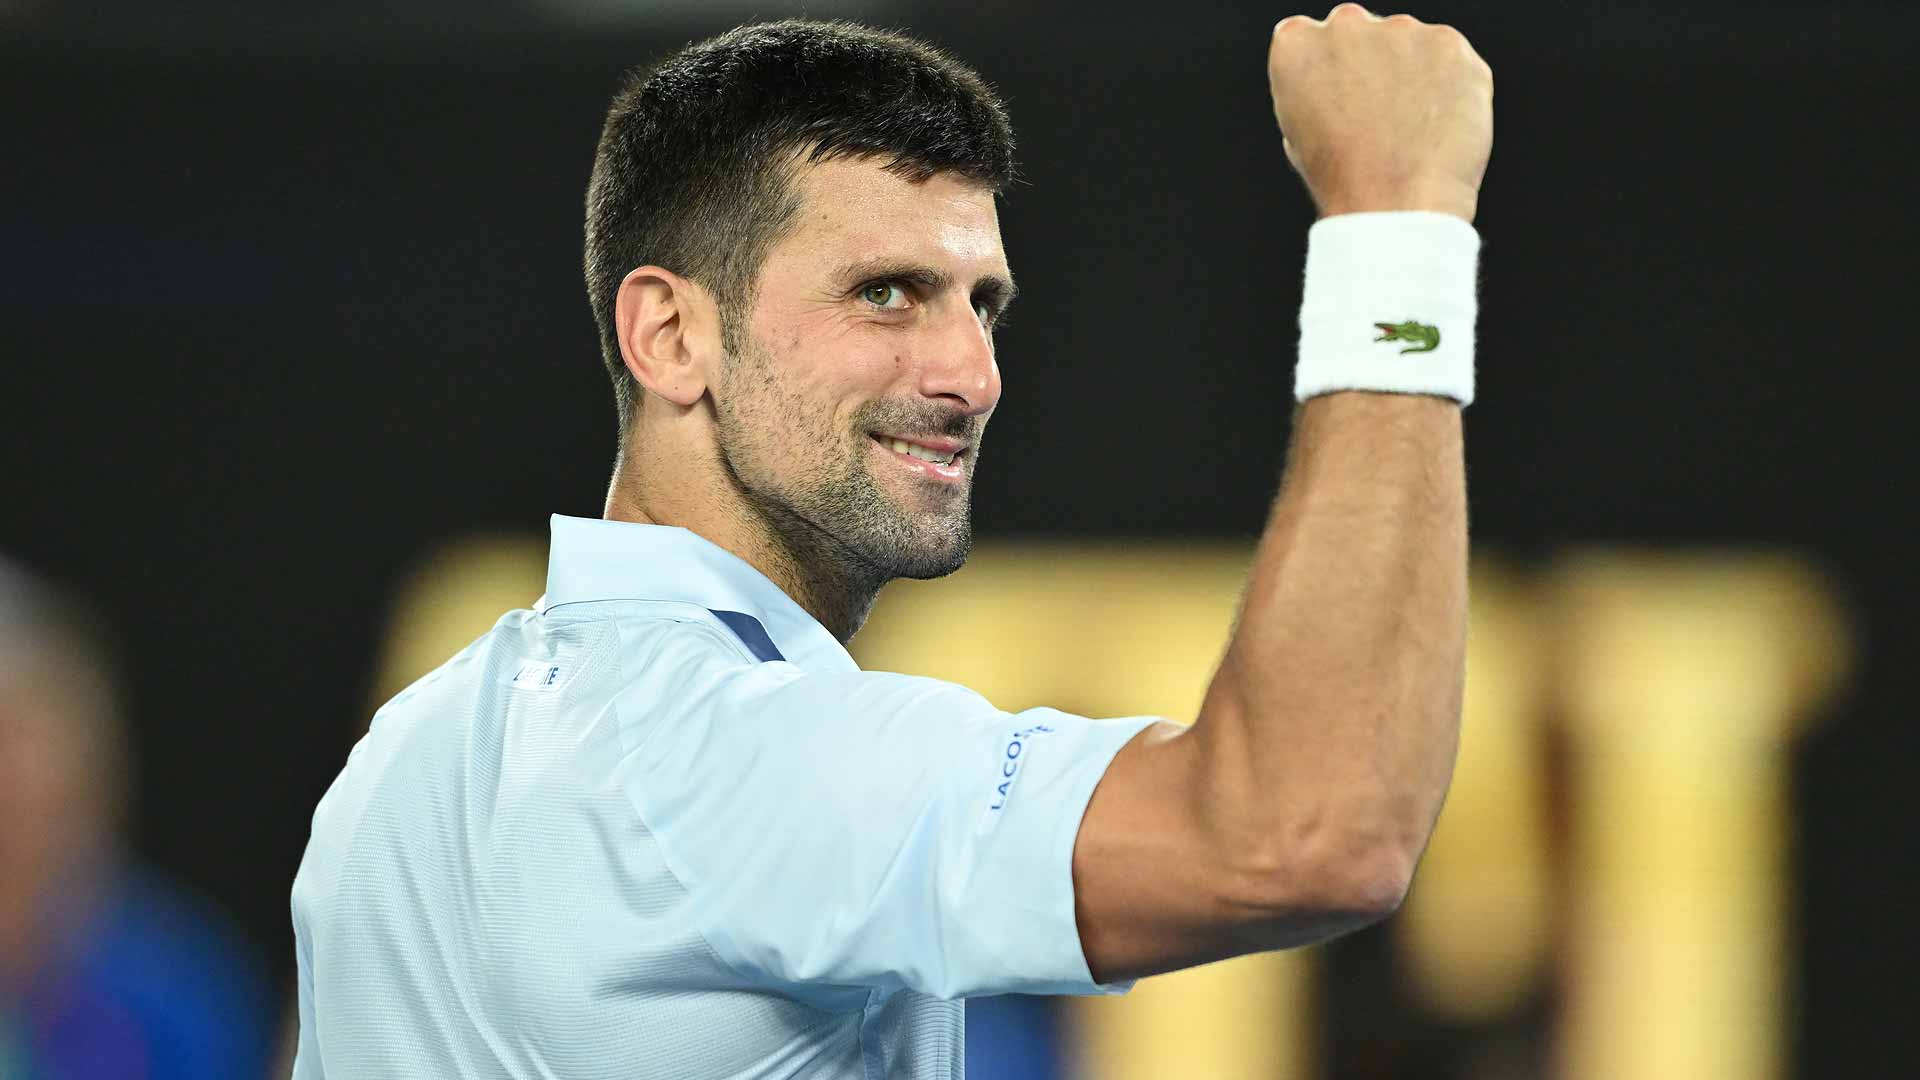 Novak Djokovic loses just three games in his fourth-round victory against Adrian Mannarino in Melbourne.